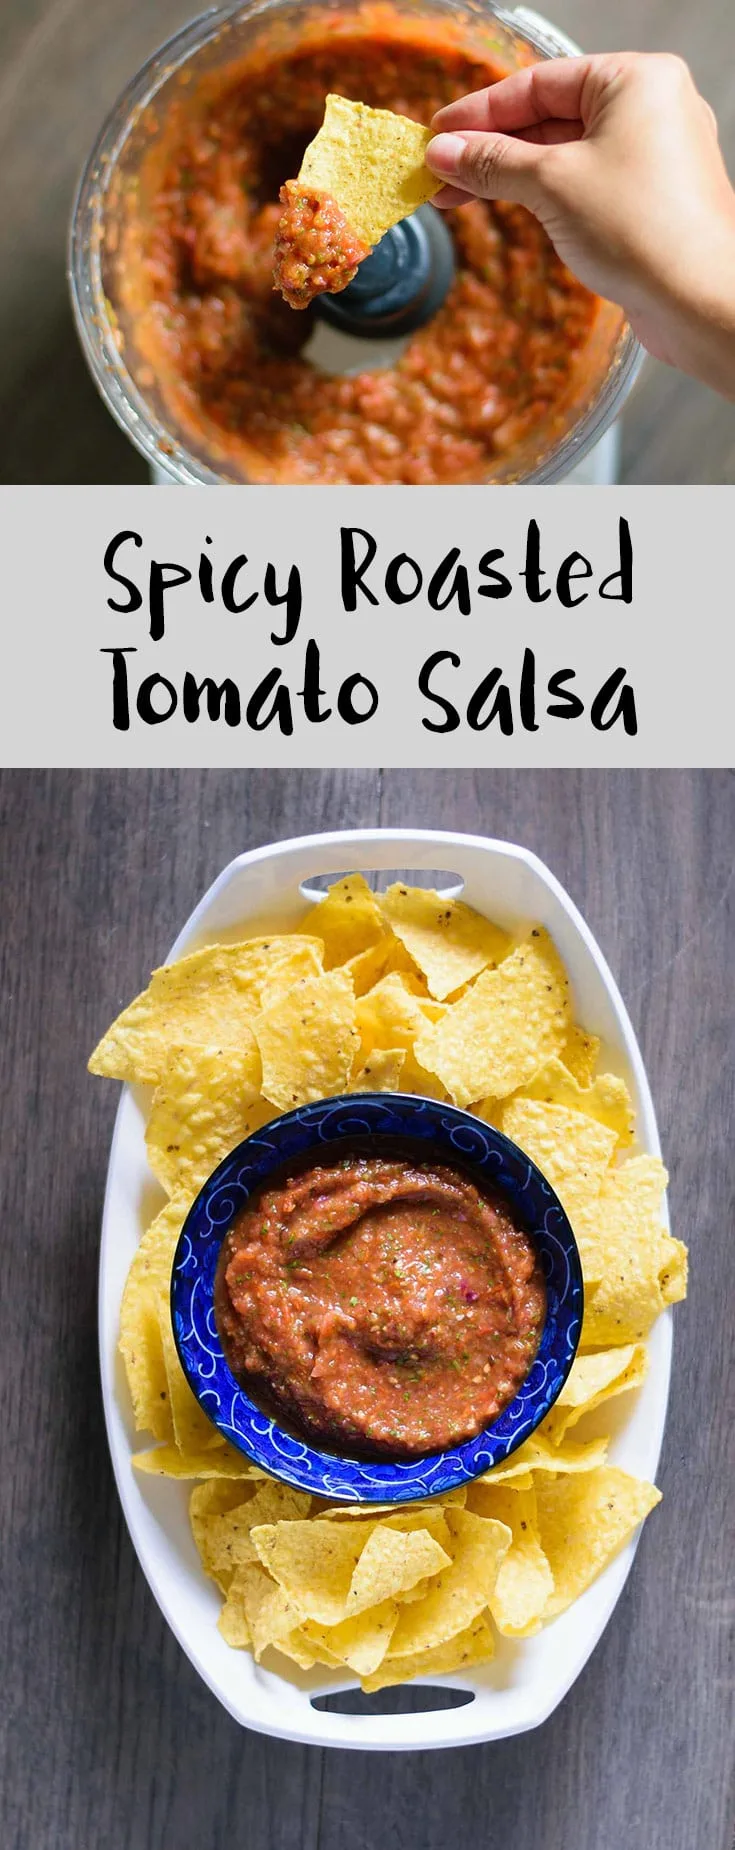 Spicy Roasted Tomato Salsa | With just 8 ingredients and ready in less than 30 minutes, this homemade salsa is super easy to make and tastes way better than store bought! This roasted tomato version is spicy and full of fresh summery flavor. | thecuriouschickpea.com